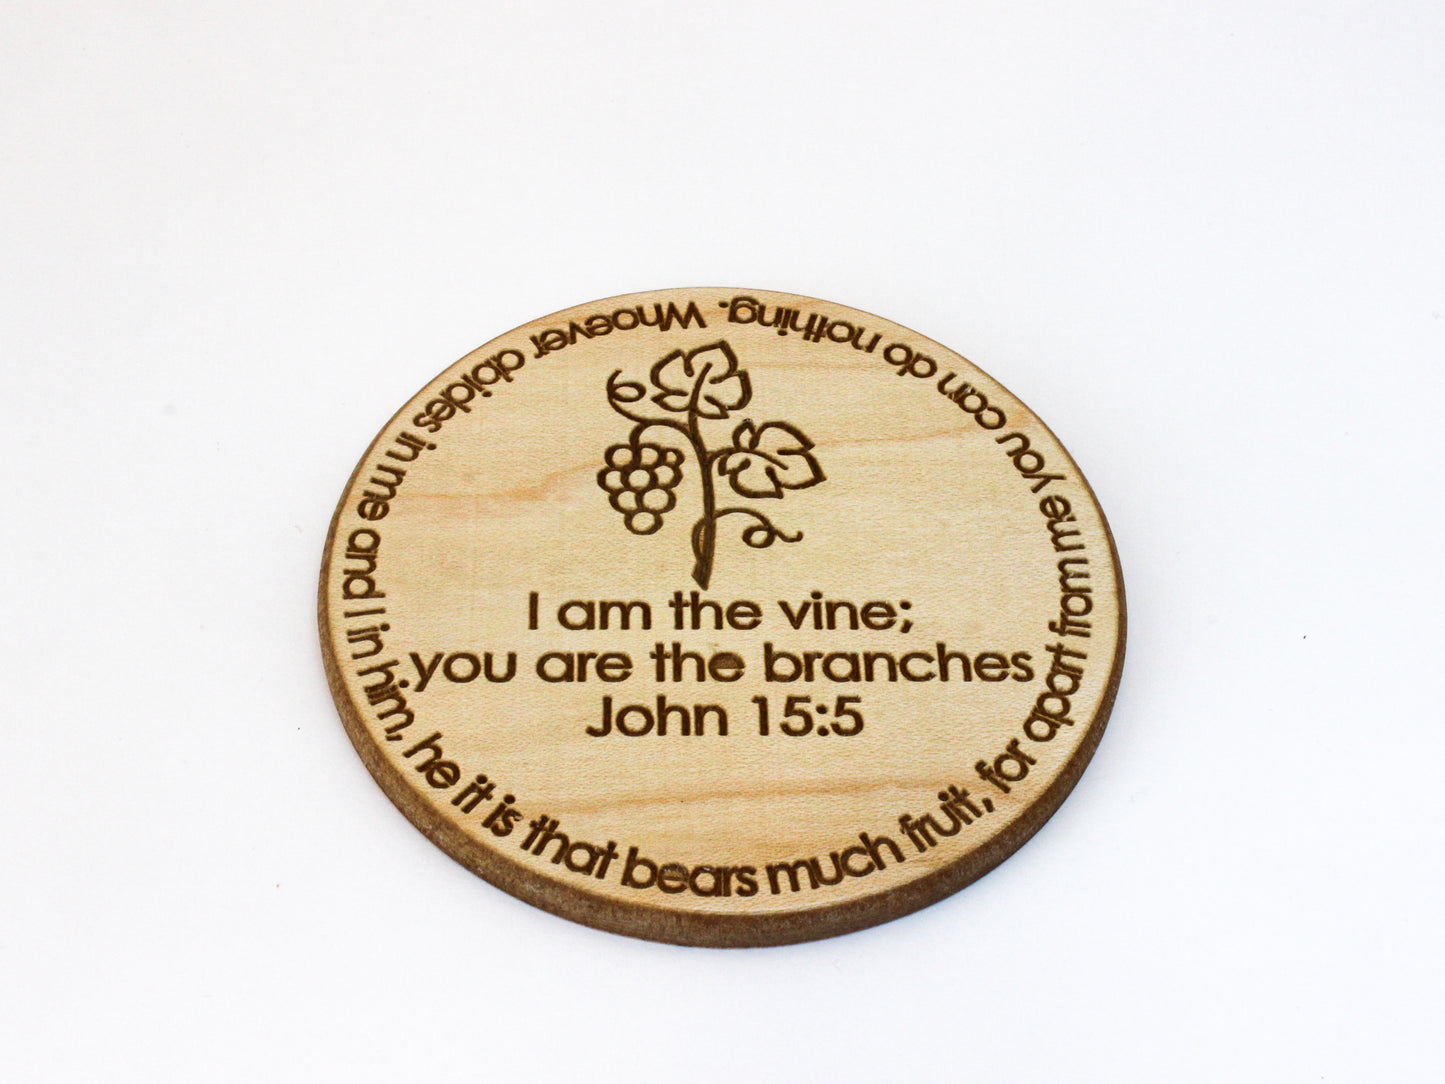 Wooden coaster engraved with image of grape vine and featuring the text of John 15:5: "I am the vine; you are the branches. Whoever abides in me and I in him, he it is that bears much fruit, for apart from me you can do nothing."